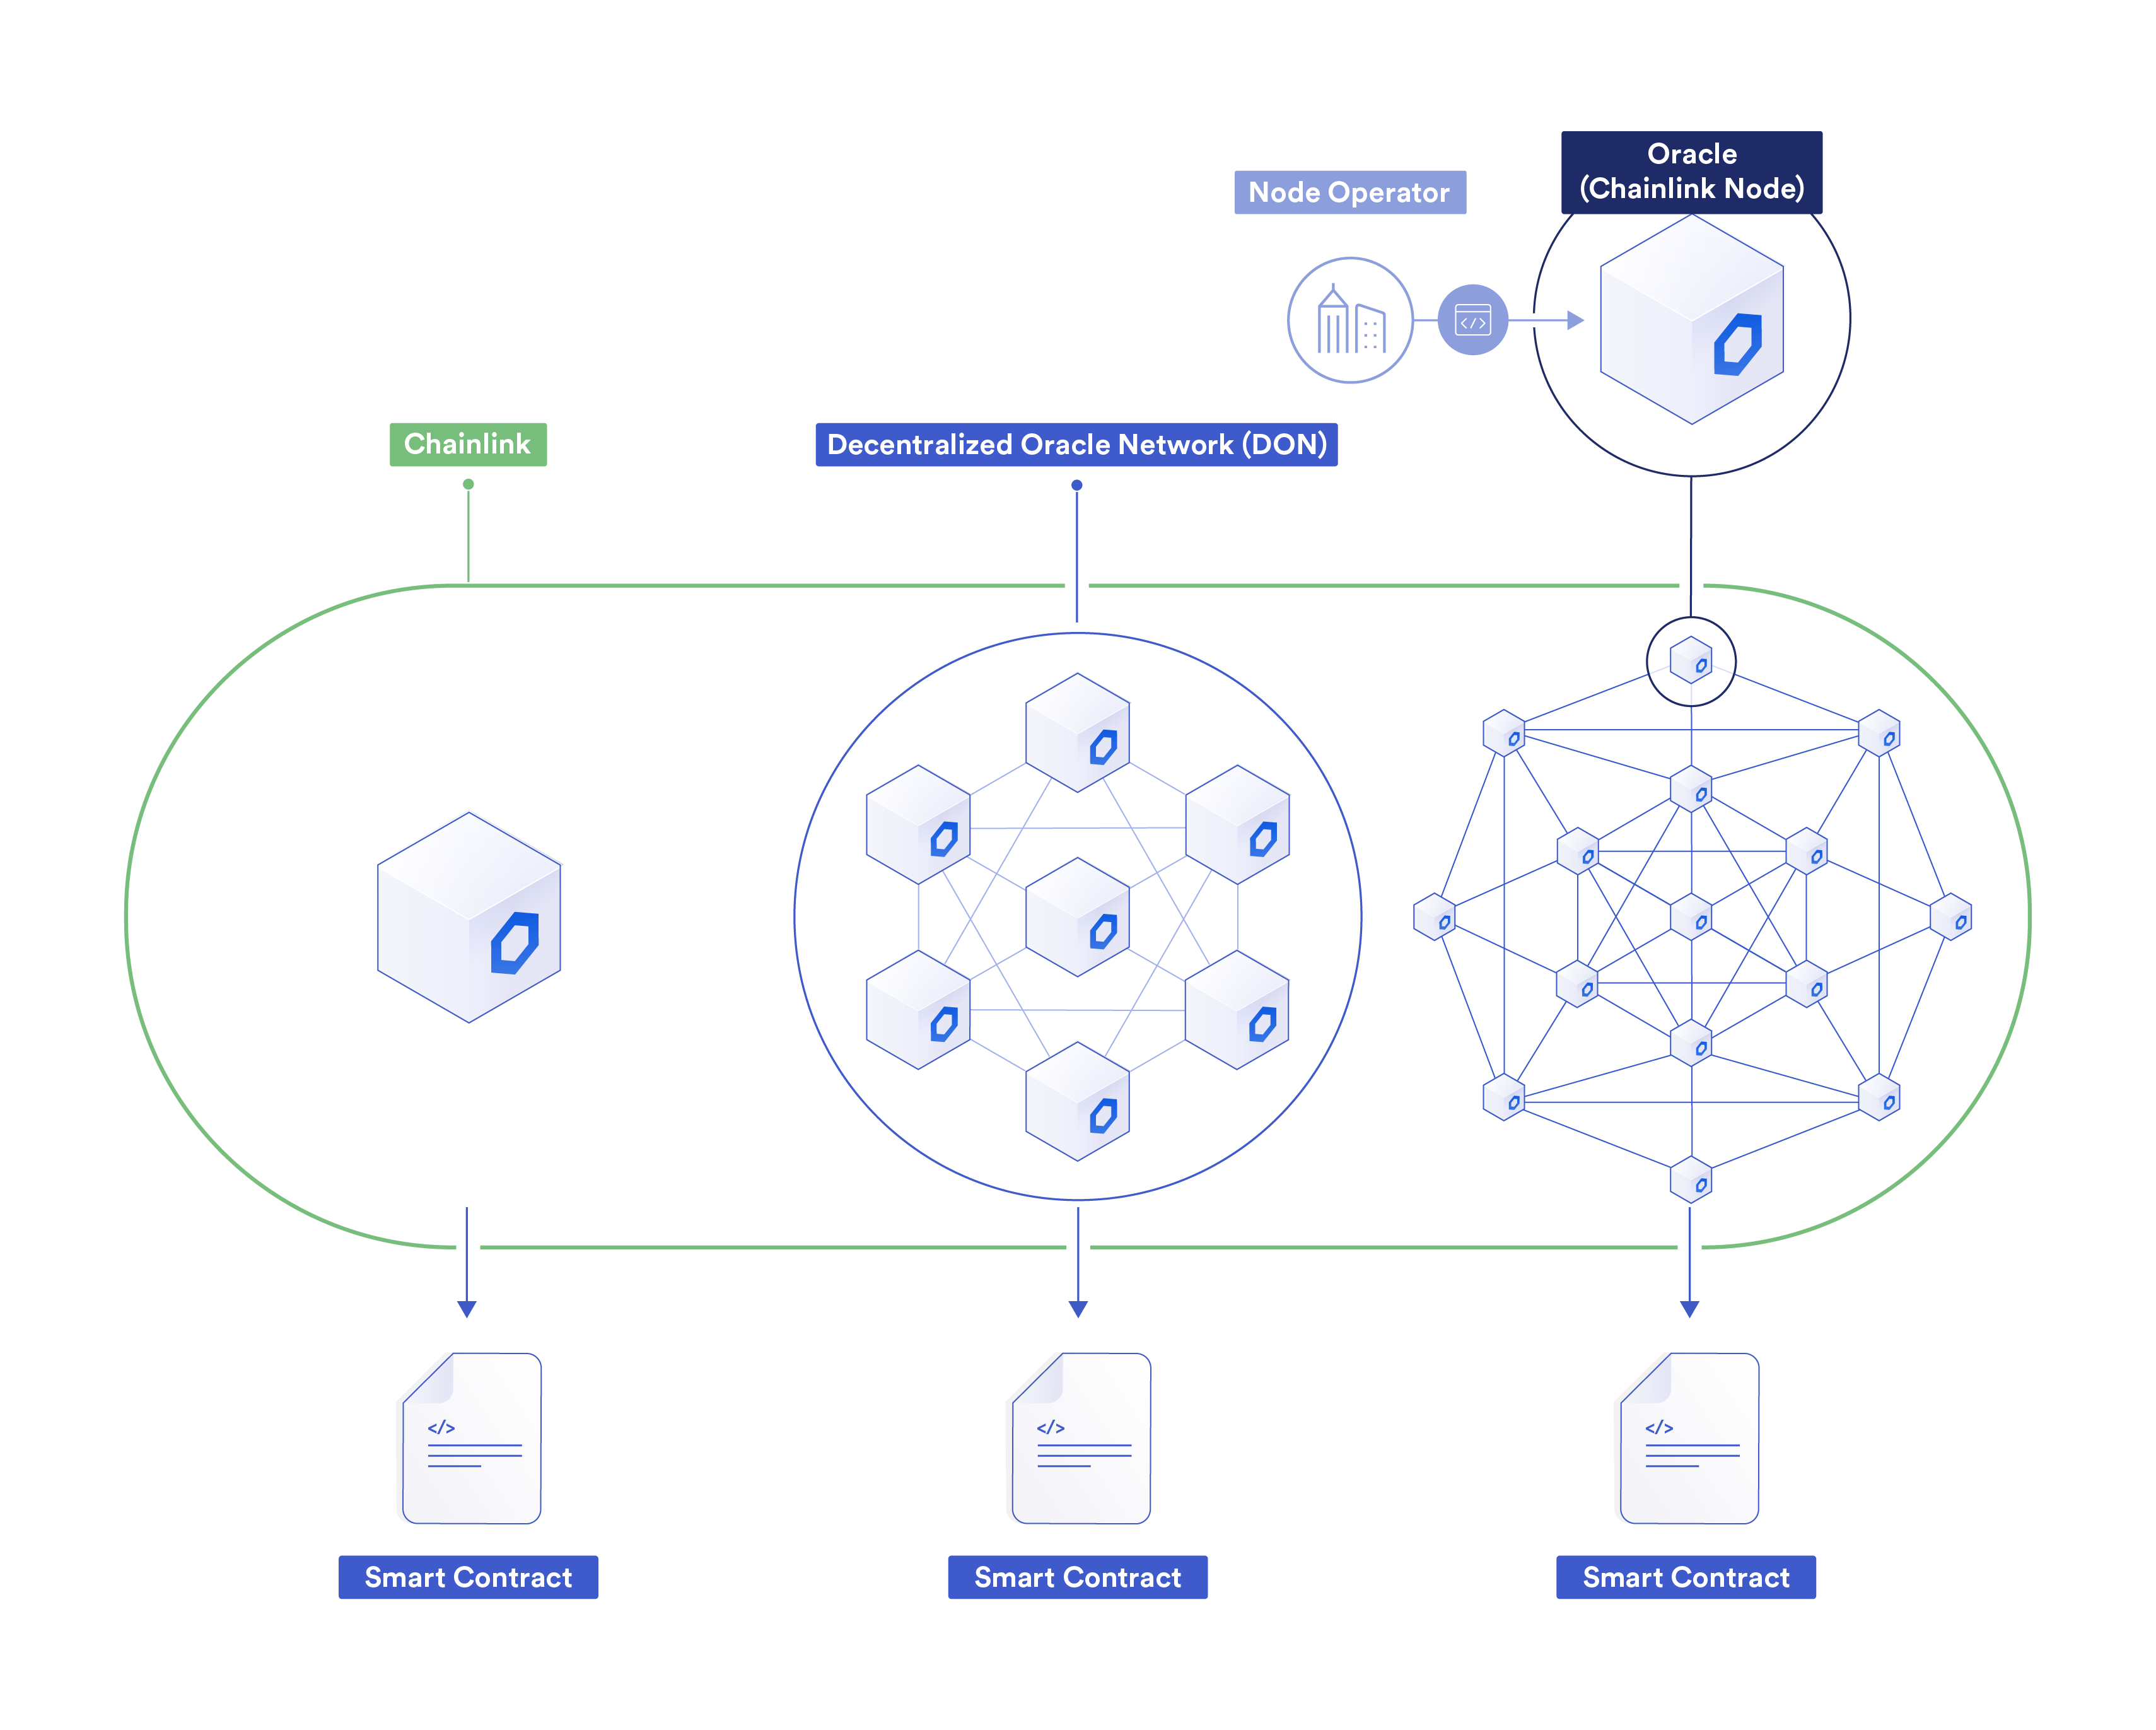 The Chainlink Network